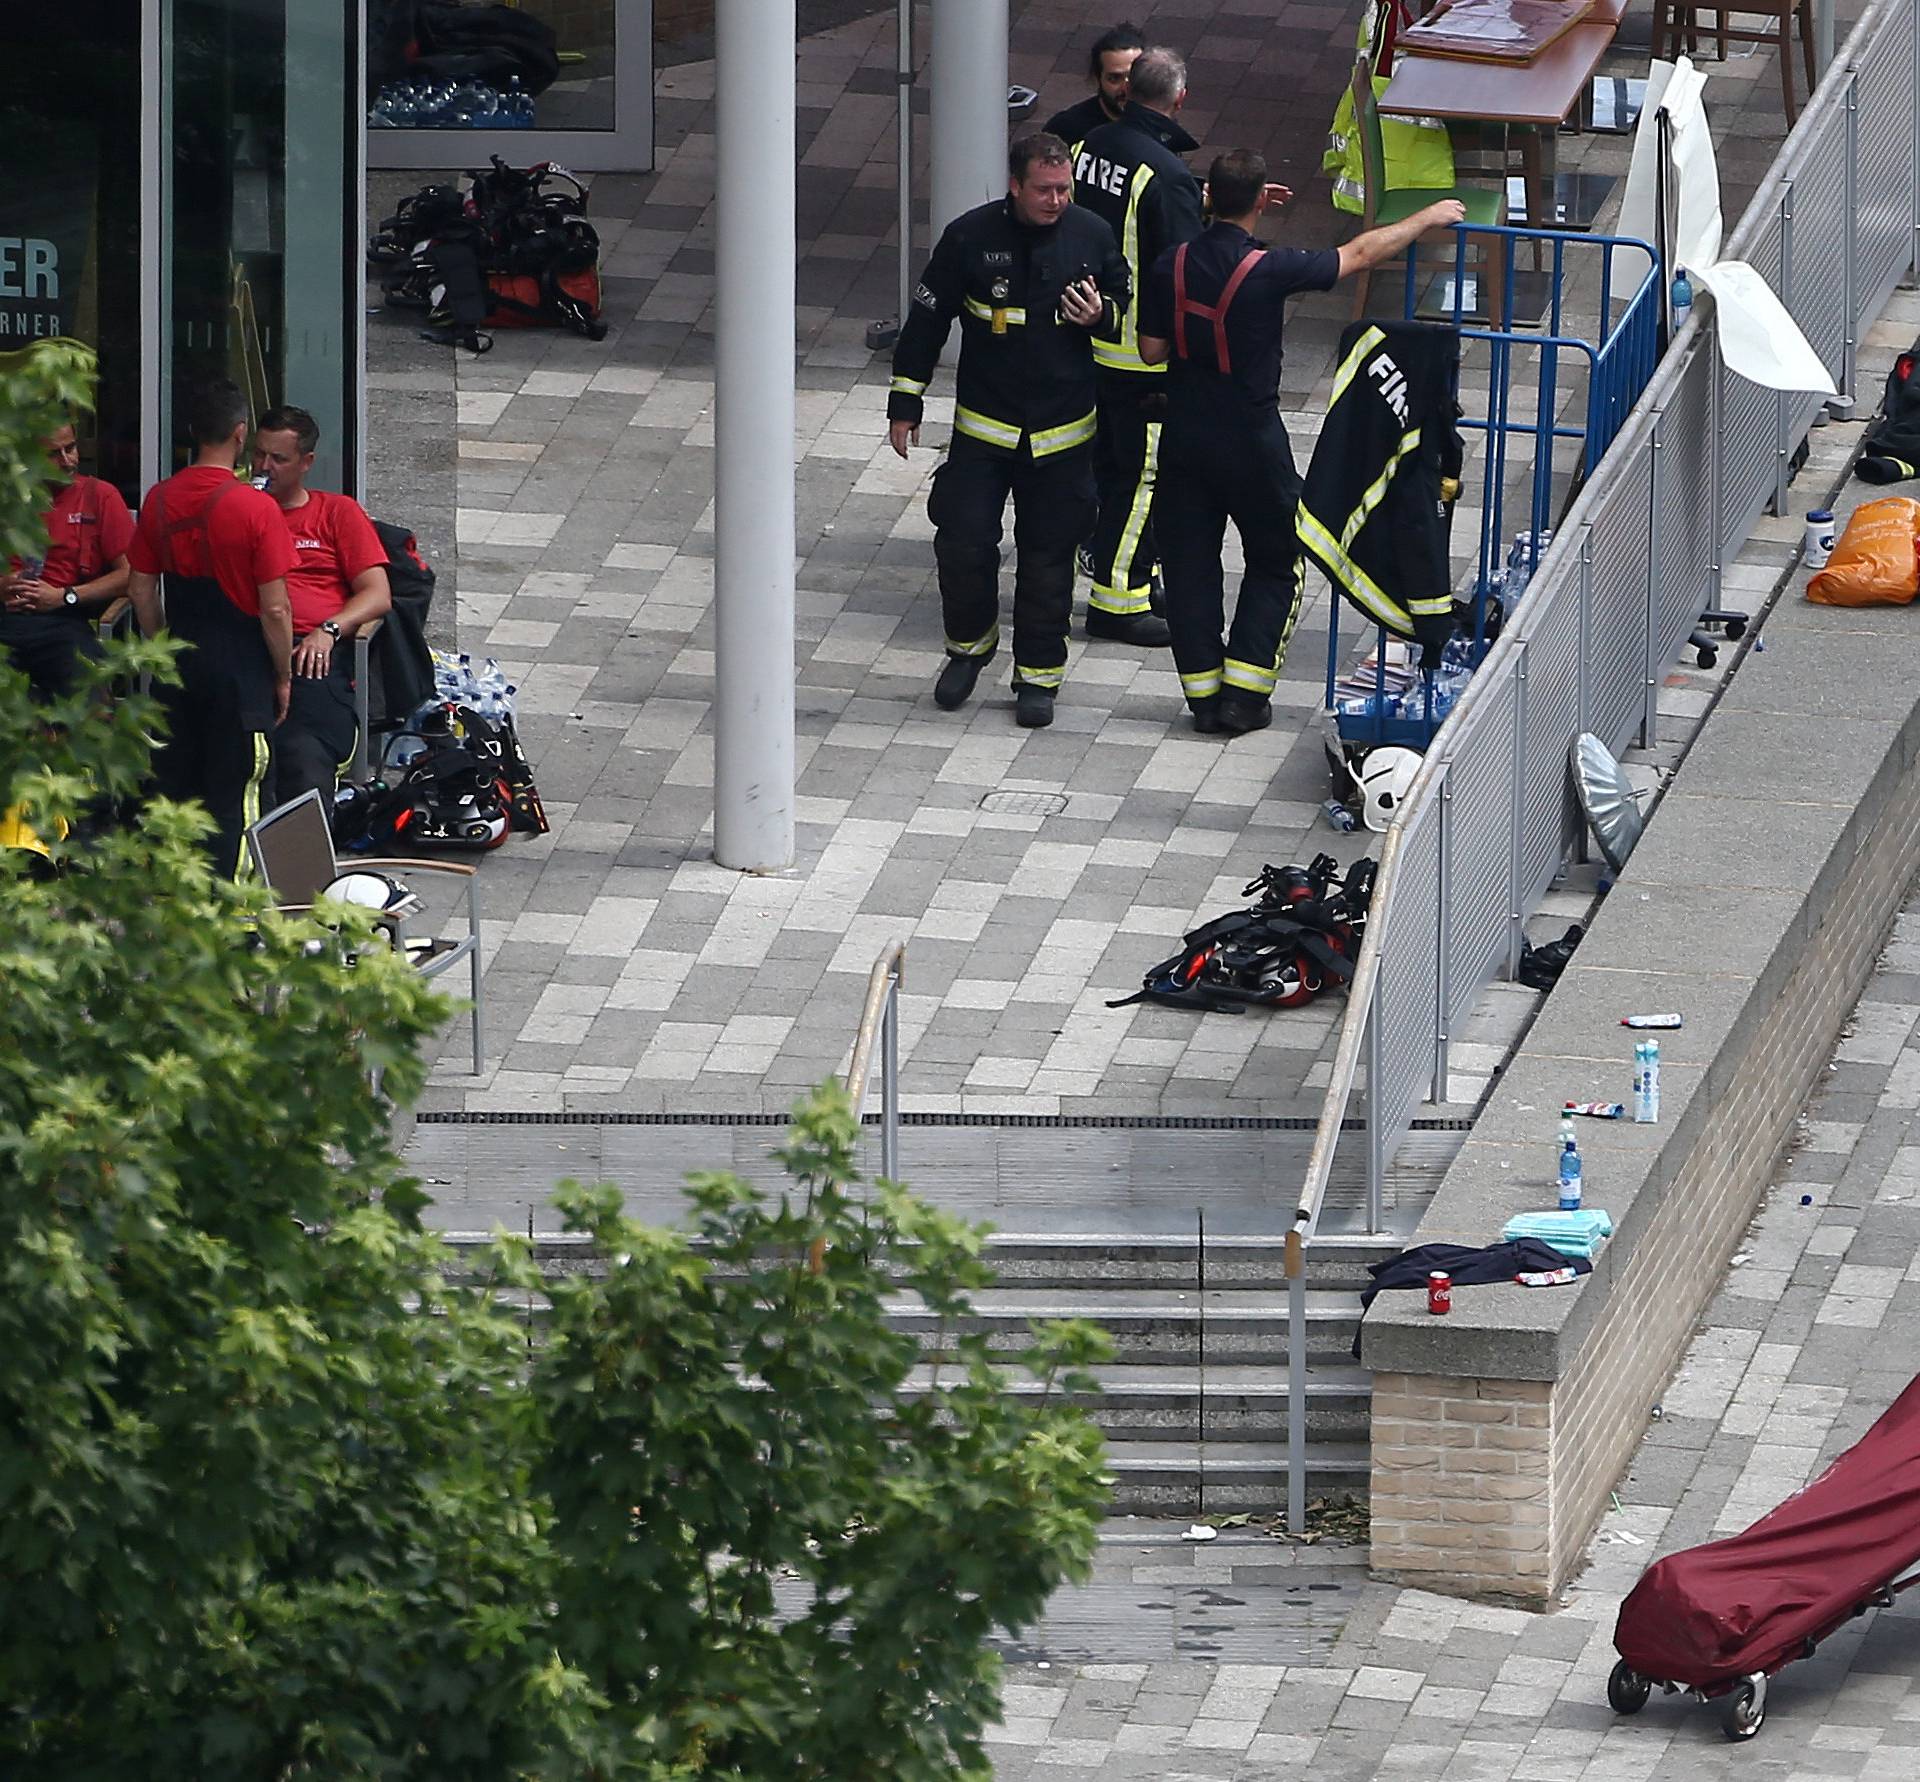 A bag on a stretcher is wheeled away from a tower block that was severely damaged by a serious fire, in north Kensington, West London